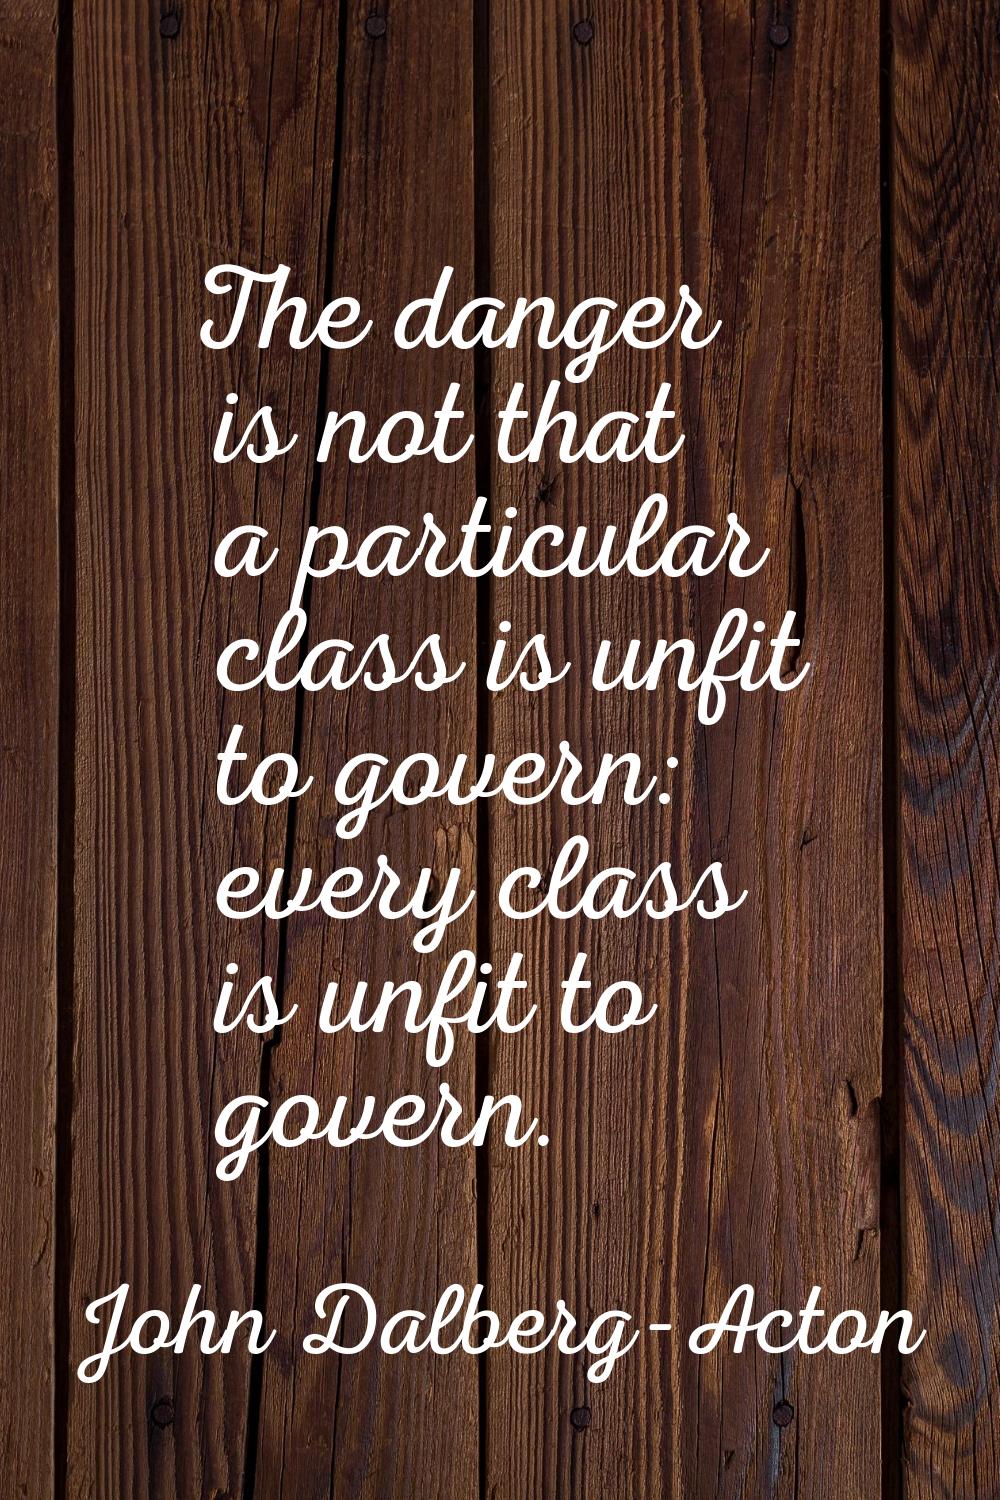 The danger is not that a particular class is unfit to govern: every class is unfit to govern.